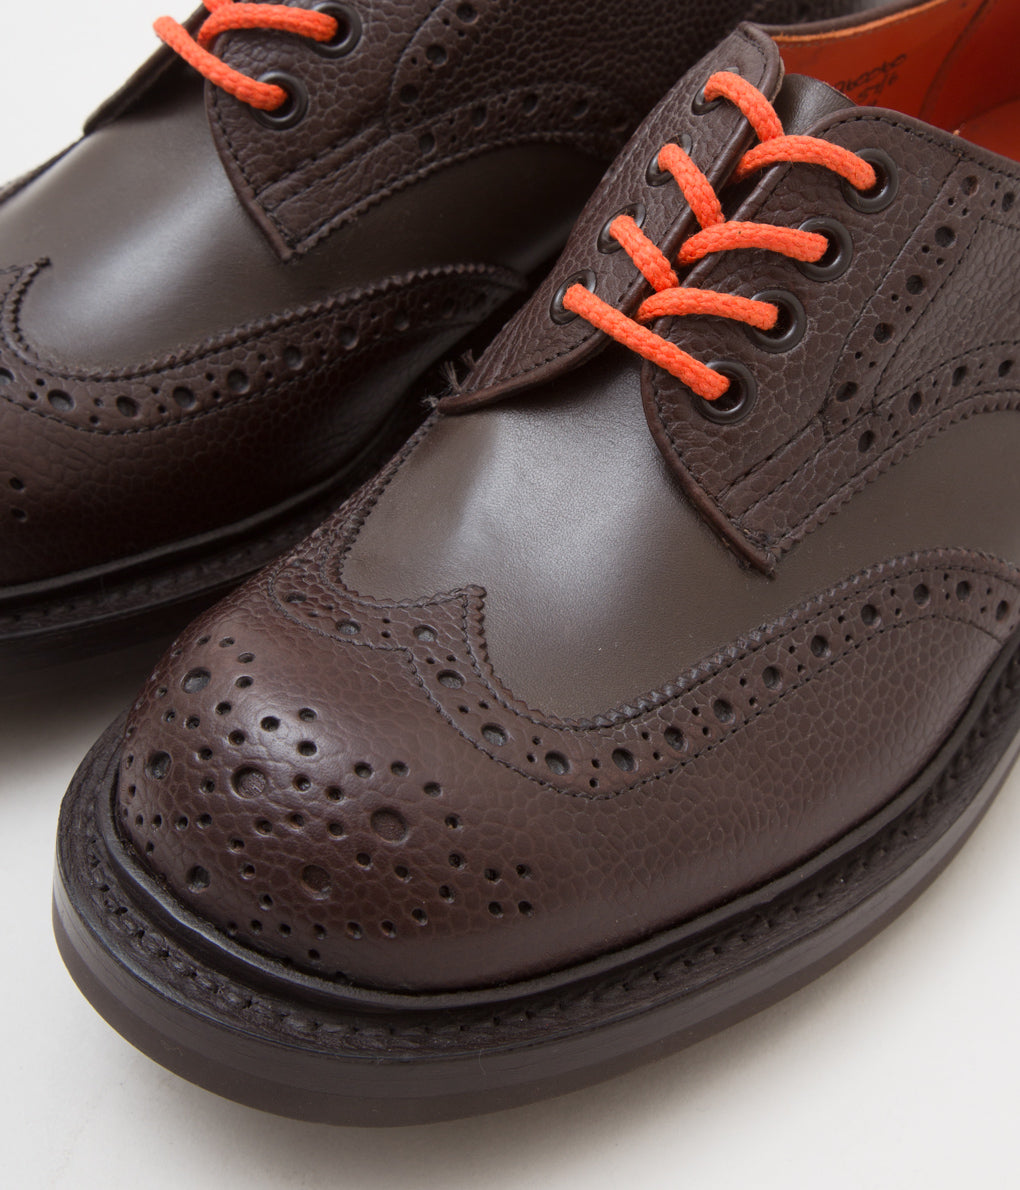 QUILP BY TRICKER'S×MAIDENS SHOP "M7457 OXFORD SHOE"(DK BROWN MULTI)